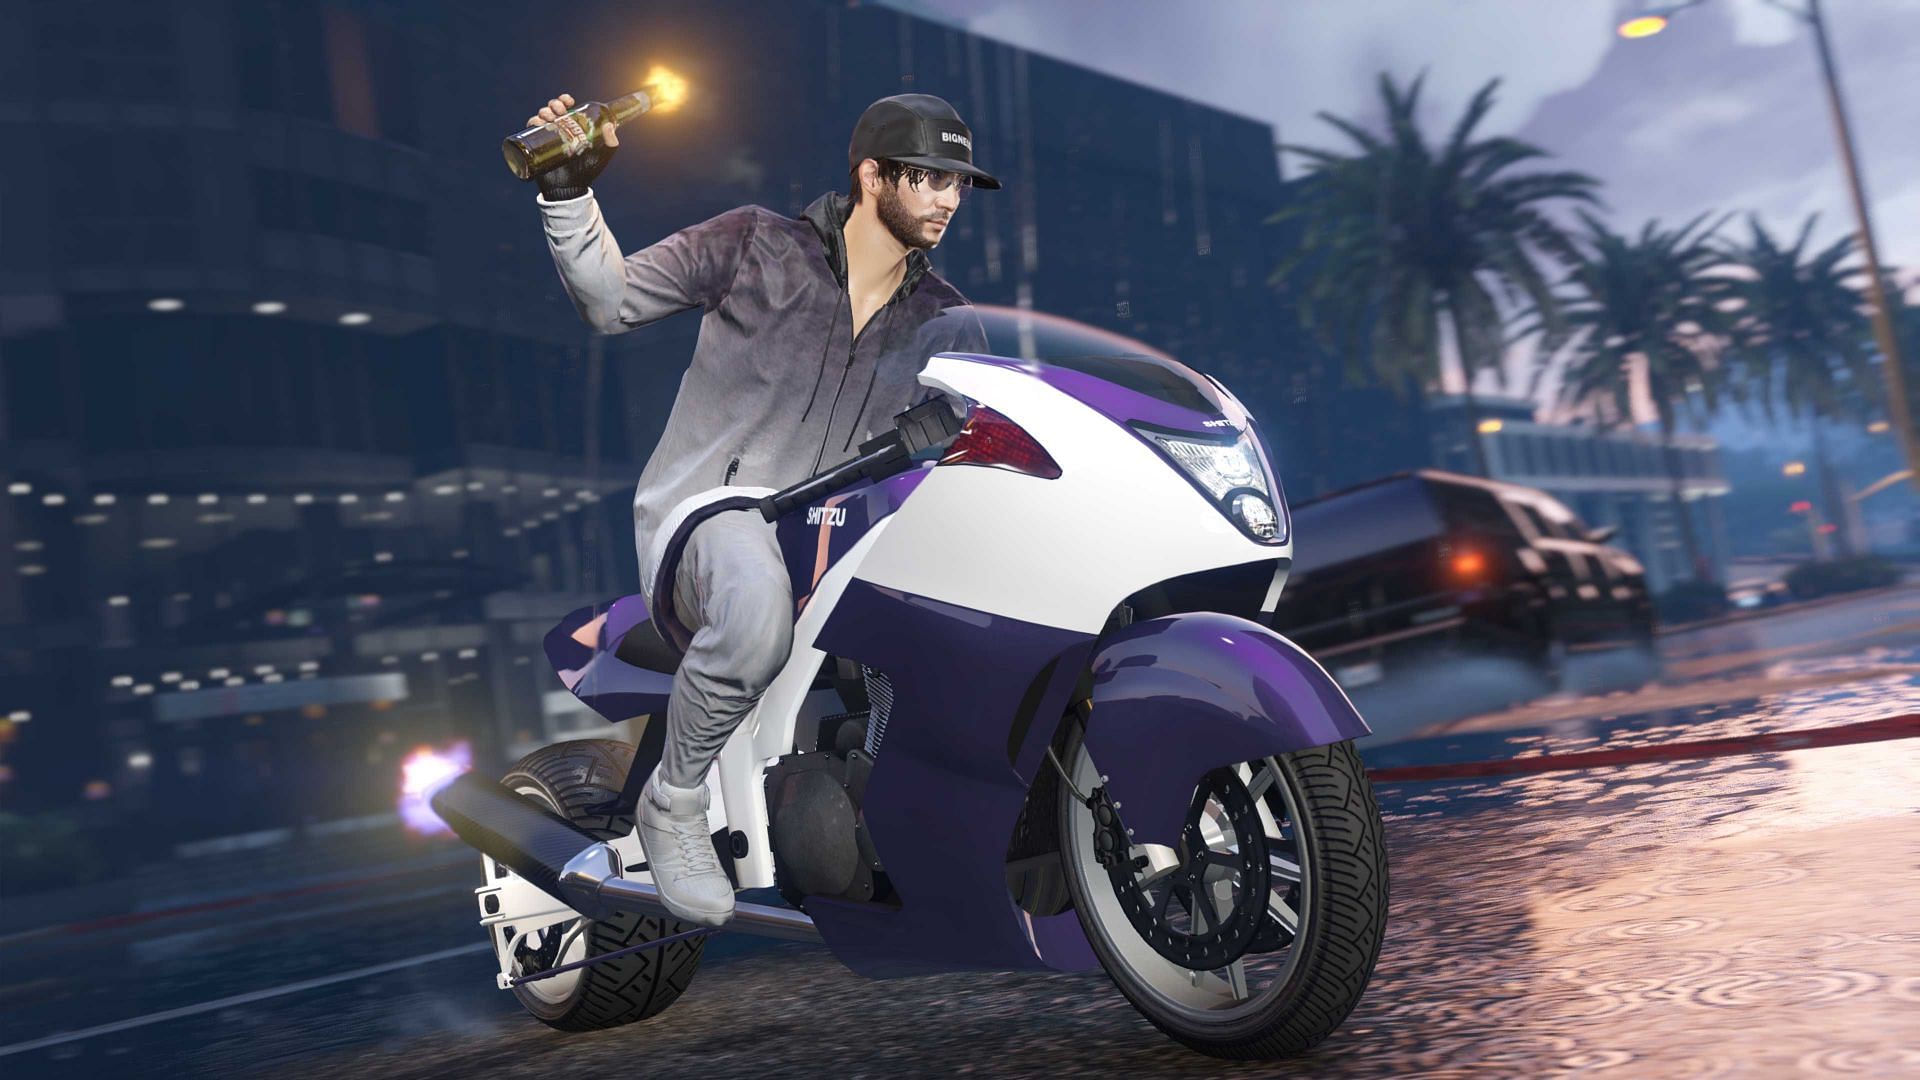 A promotional image featuring this motorcycle (Image via Rockstar Games)